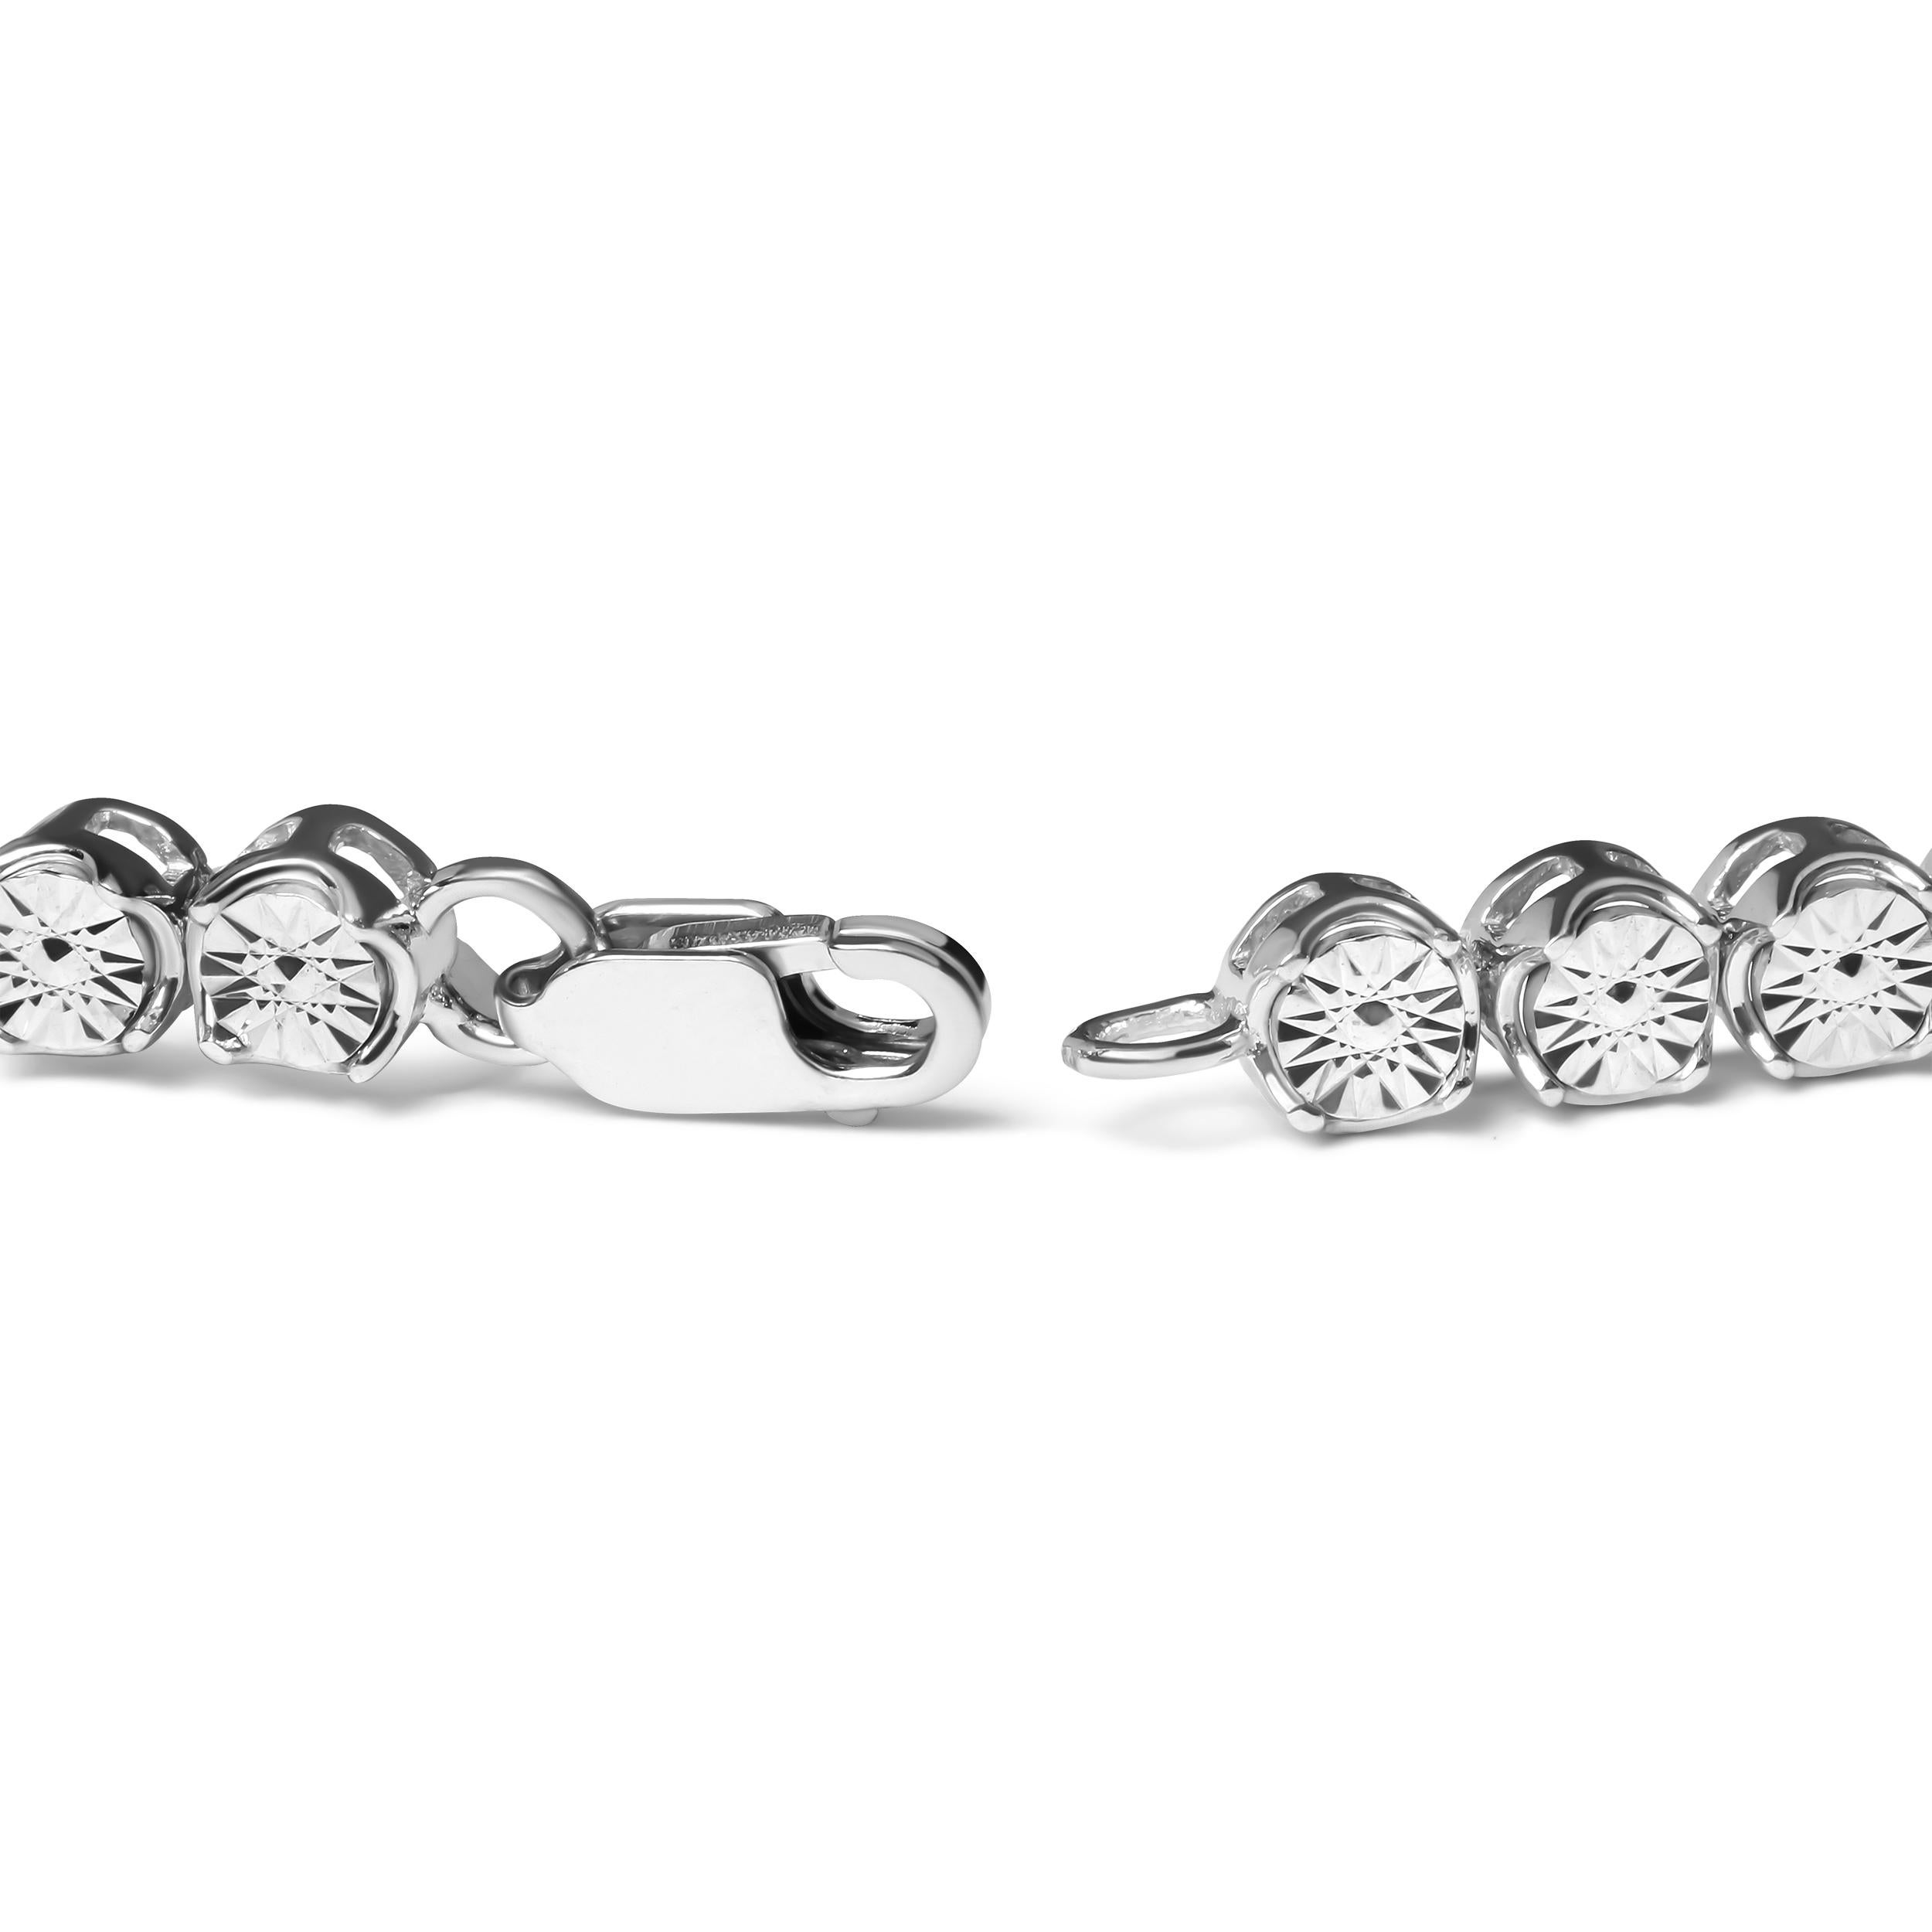 Indulge in the luxurious sparkle of diamonds with this breathtaking sterling silver tennis bracelet. Expertly crafted from .925 sterling silver, this bracelet showcases 10 natural round cut diamonds in a brilliant miracle setting. The diamonds boast